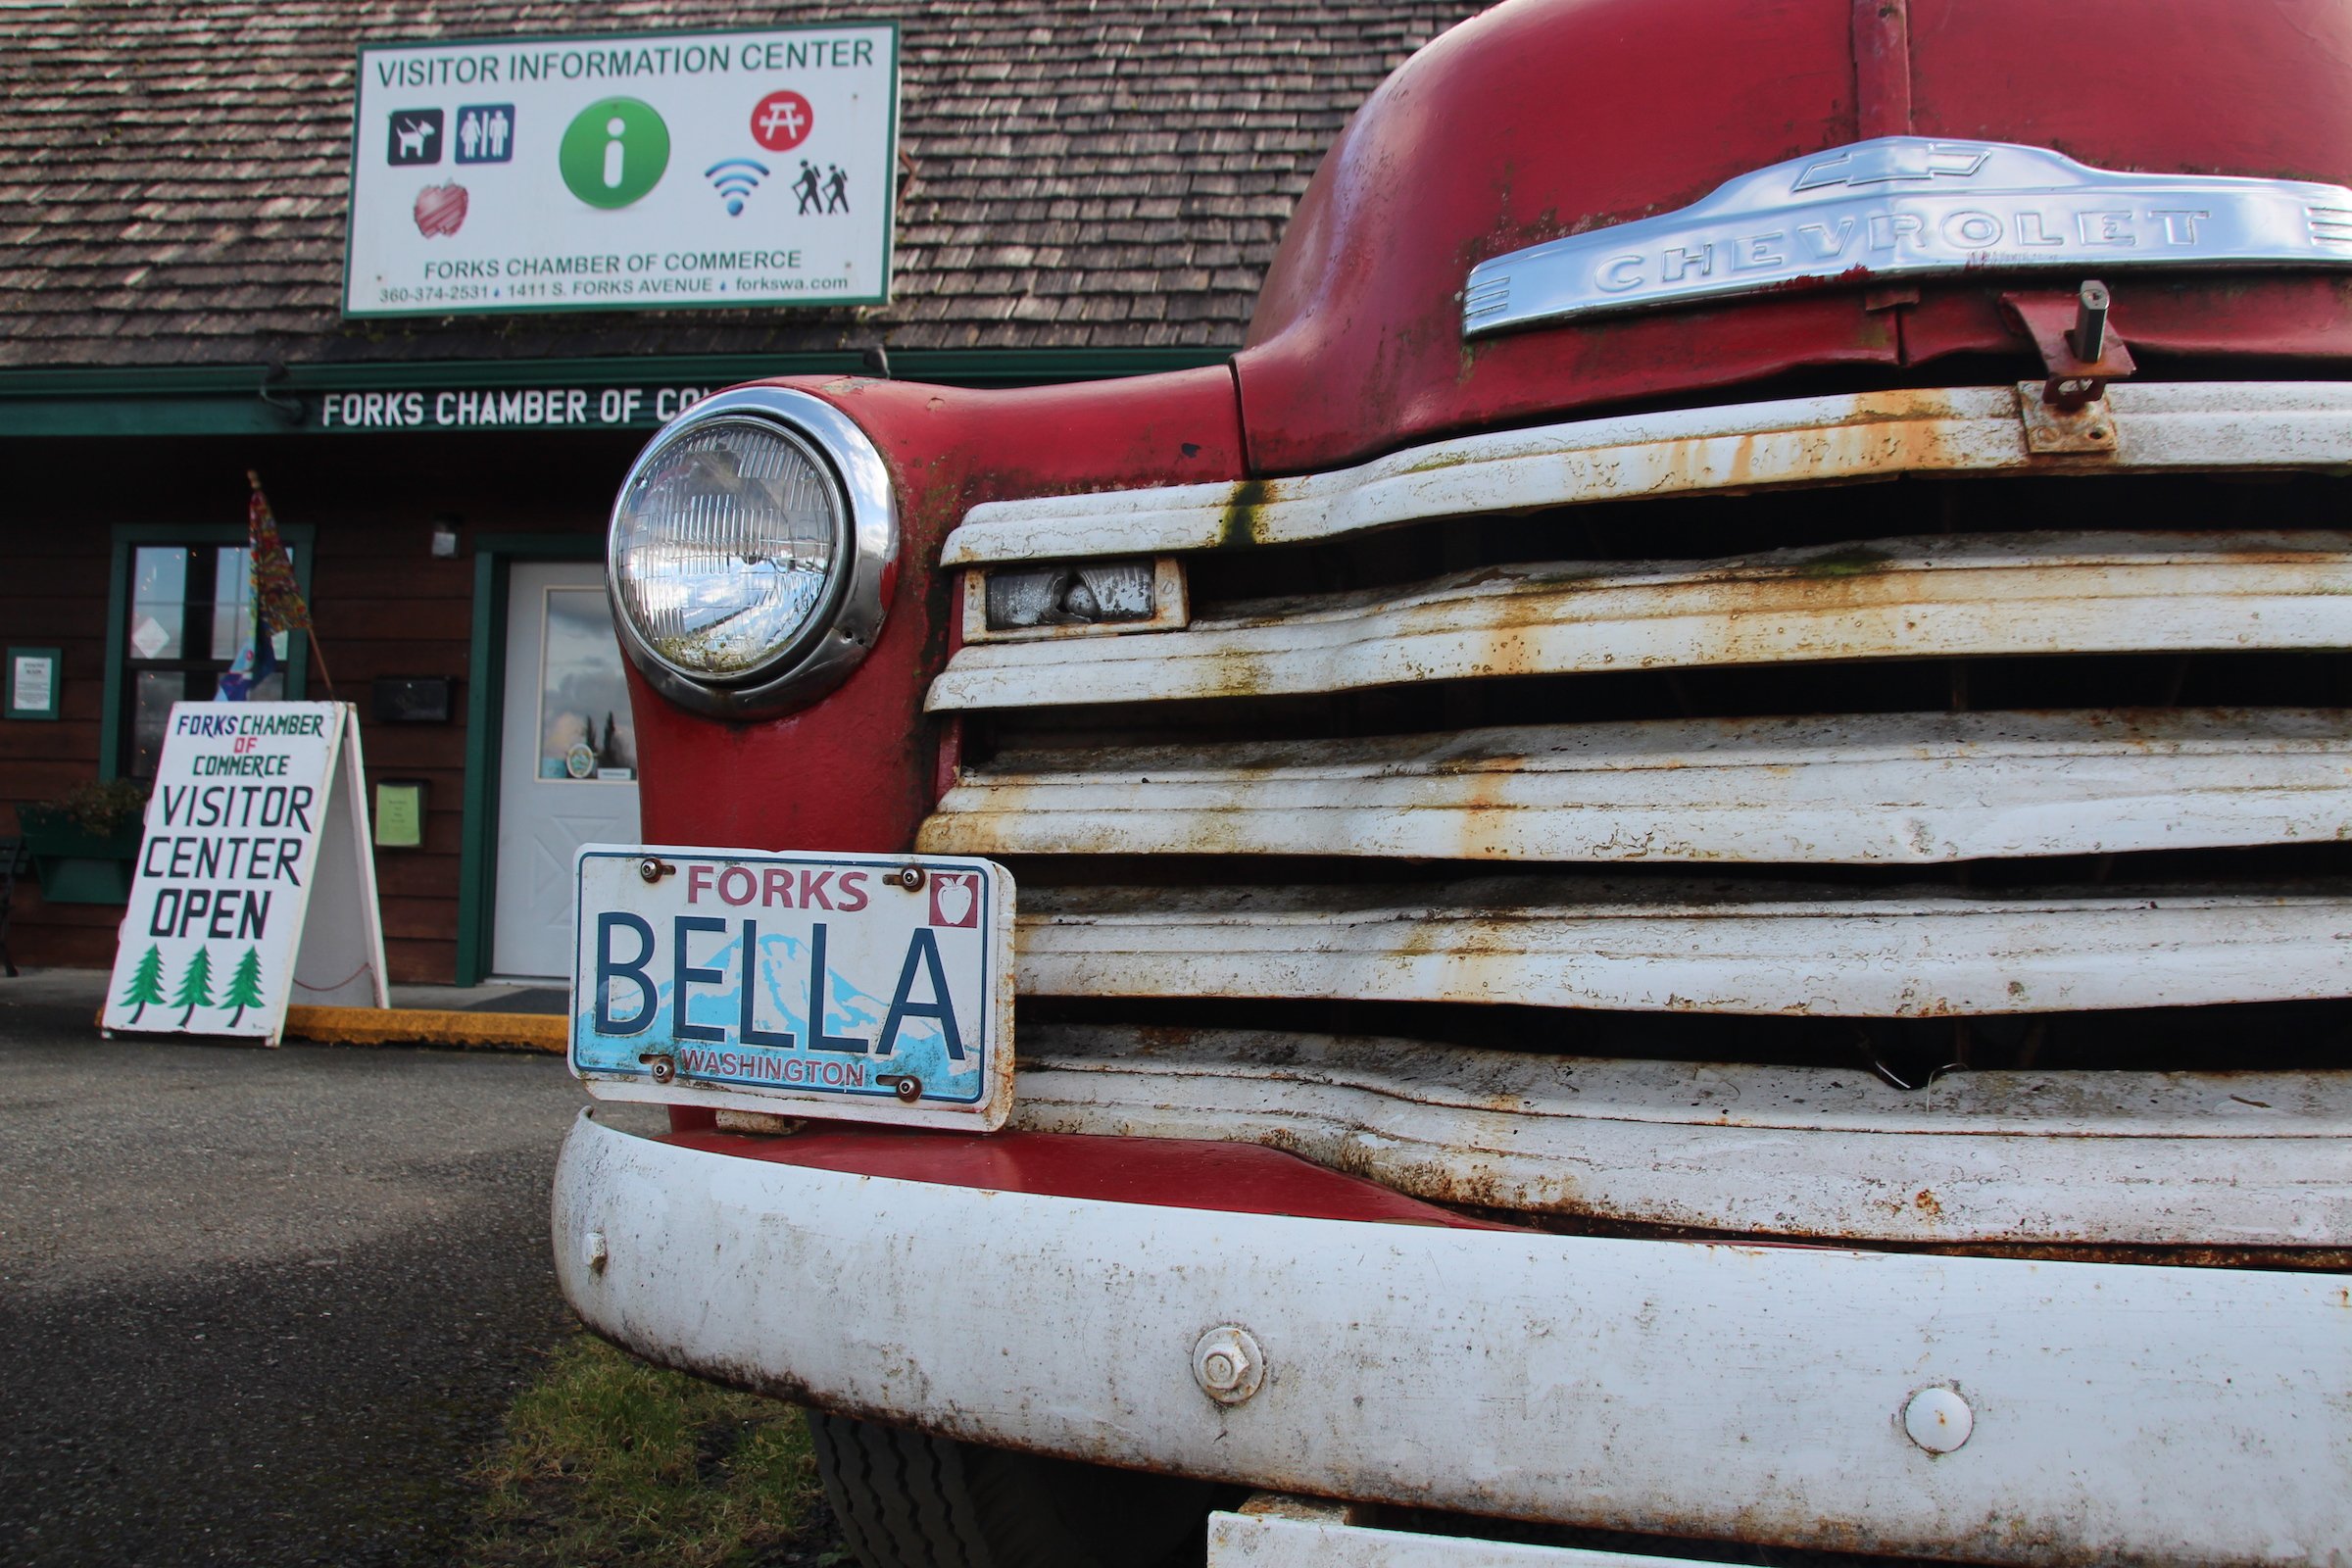 An old Chevrolet is parked in front of the visitor centre in the small town of Forks